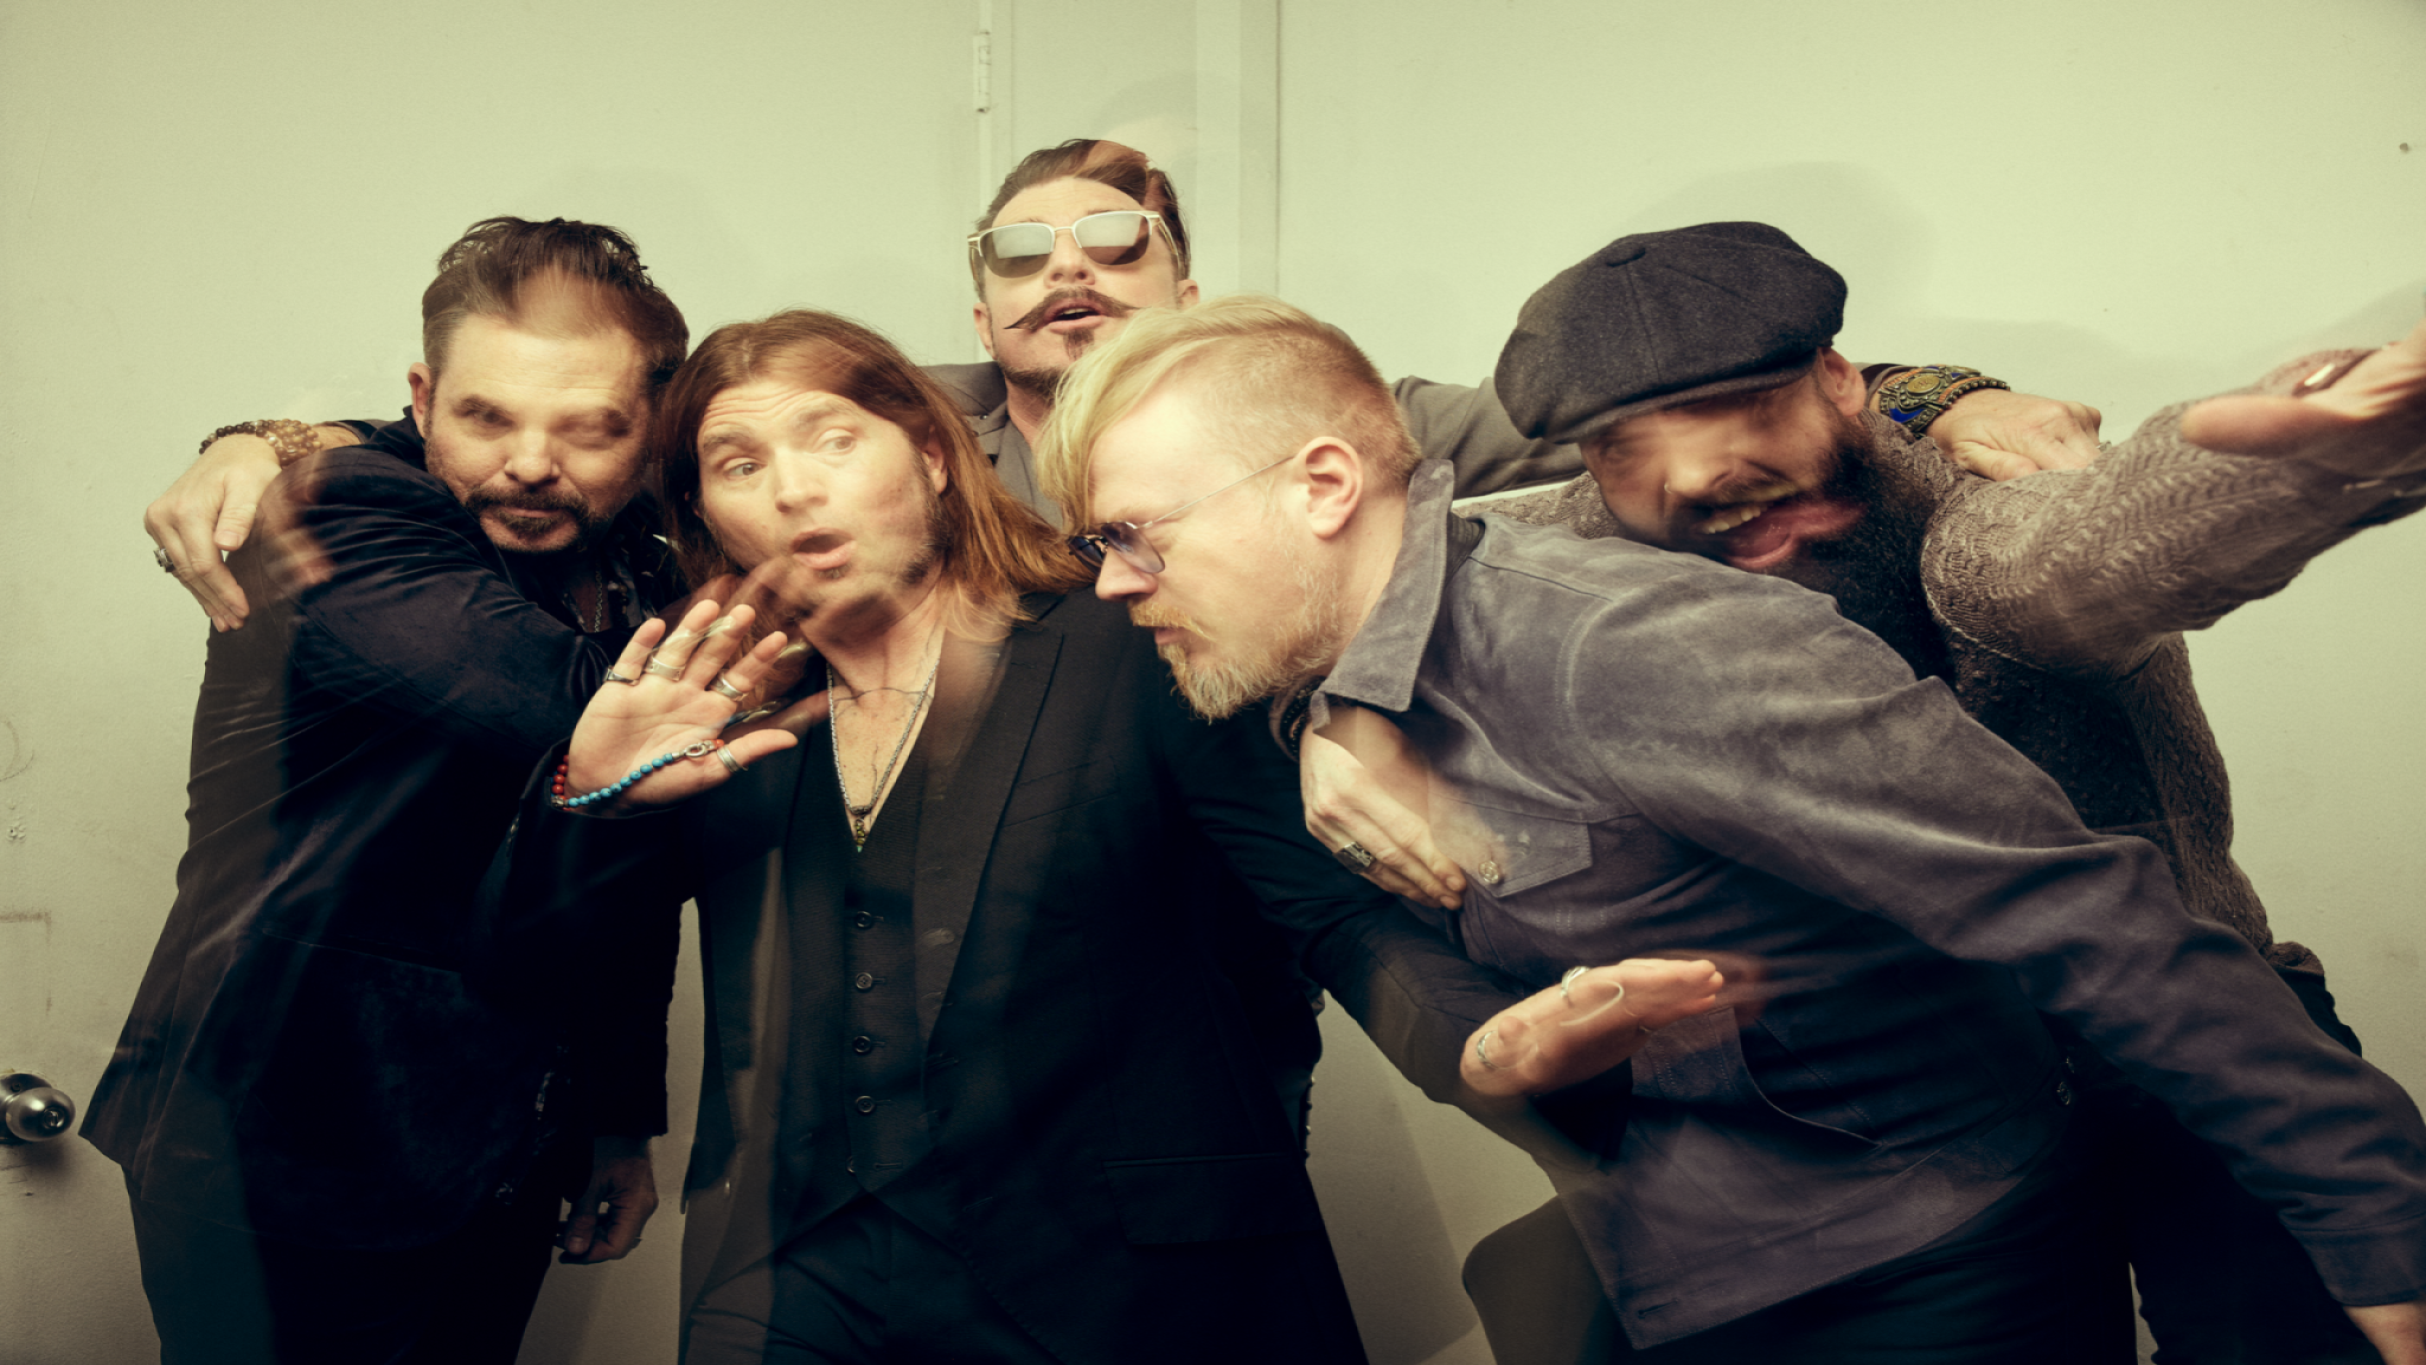 RIVAL SONS & CLUTCH: The Two-Headed Beast Tour